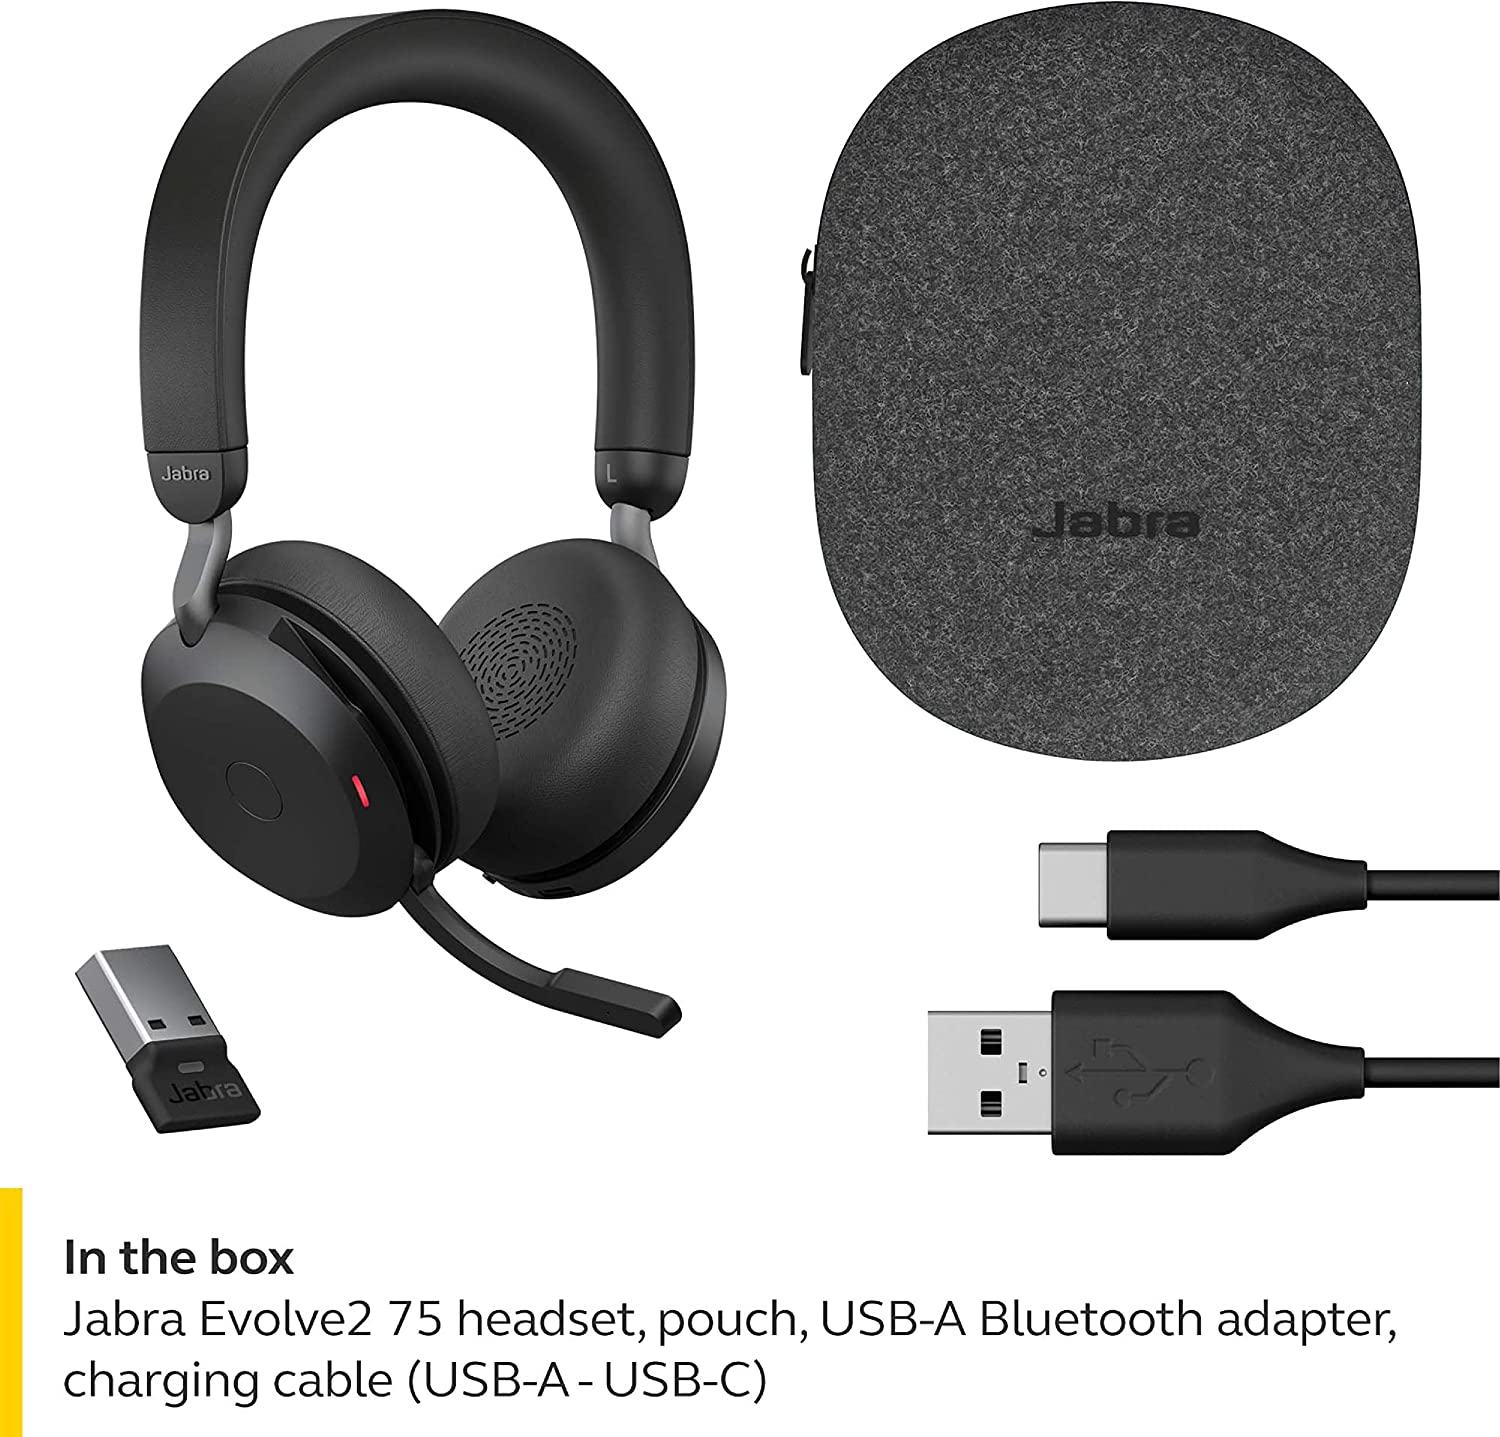 Jabra Evolve2 75 MS Wireless Headset with 8-Microphone Technology - Dual Foam Stereo Headphones with Adjustable Advanced Active Noise Cancelling, USB-A Bluetooth Adapter